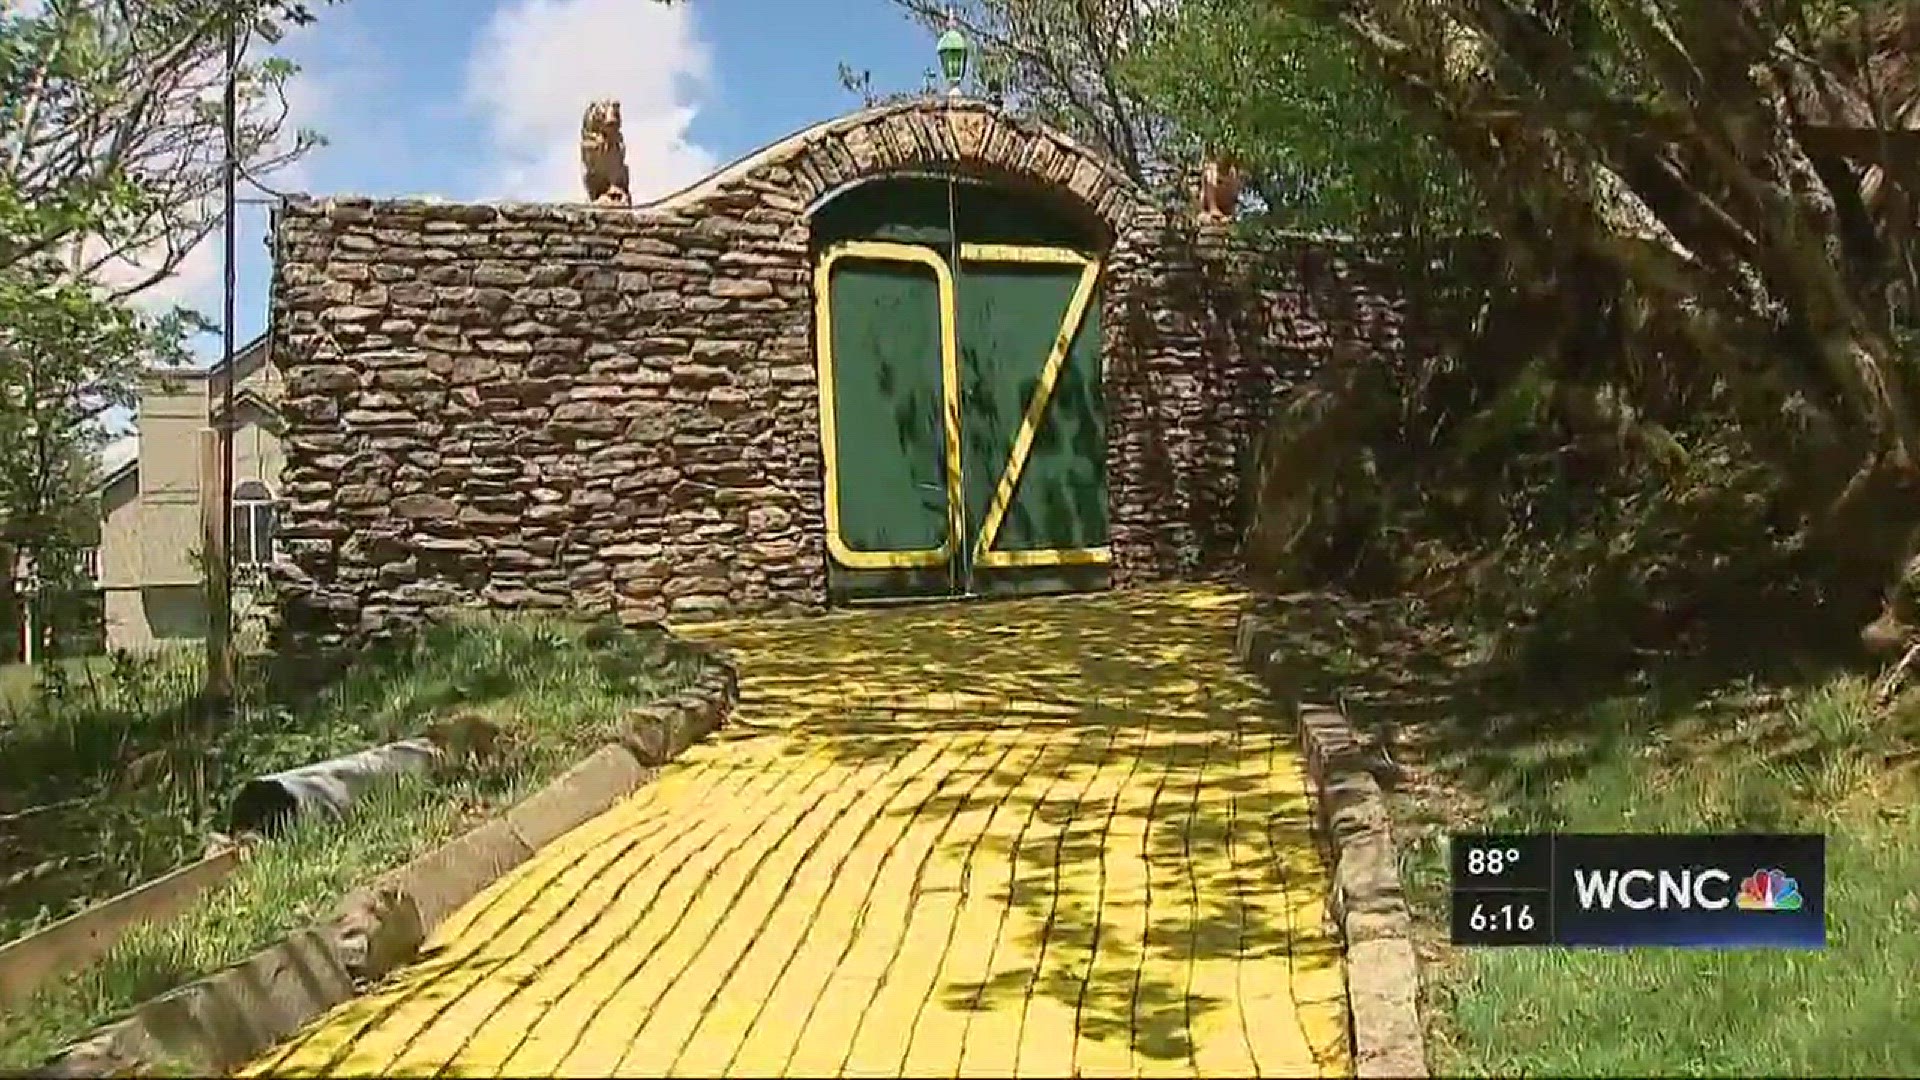 The "Land of Oz" park opens to guests this month, taking visitors on a trip over the rainbow.